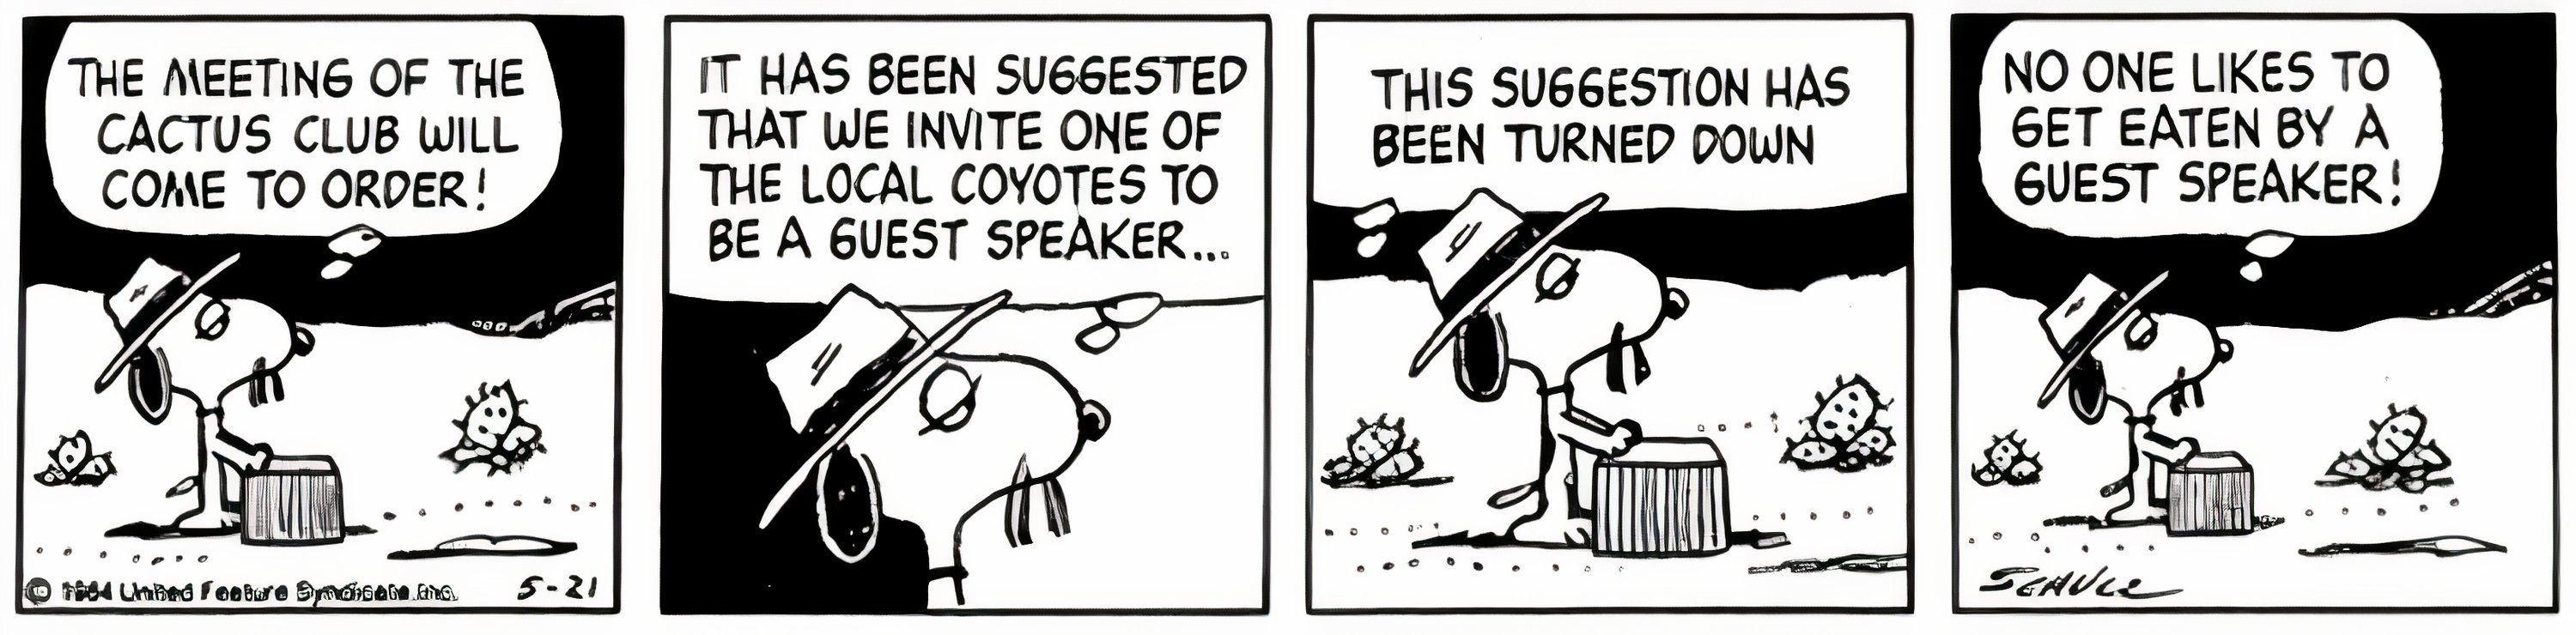 Peanuts, Spike rejects a coyote applicant for the cactus club.